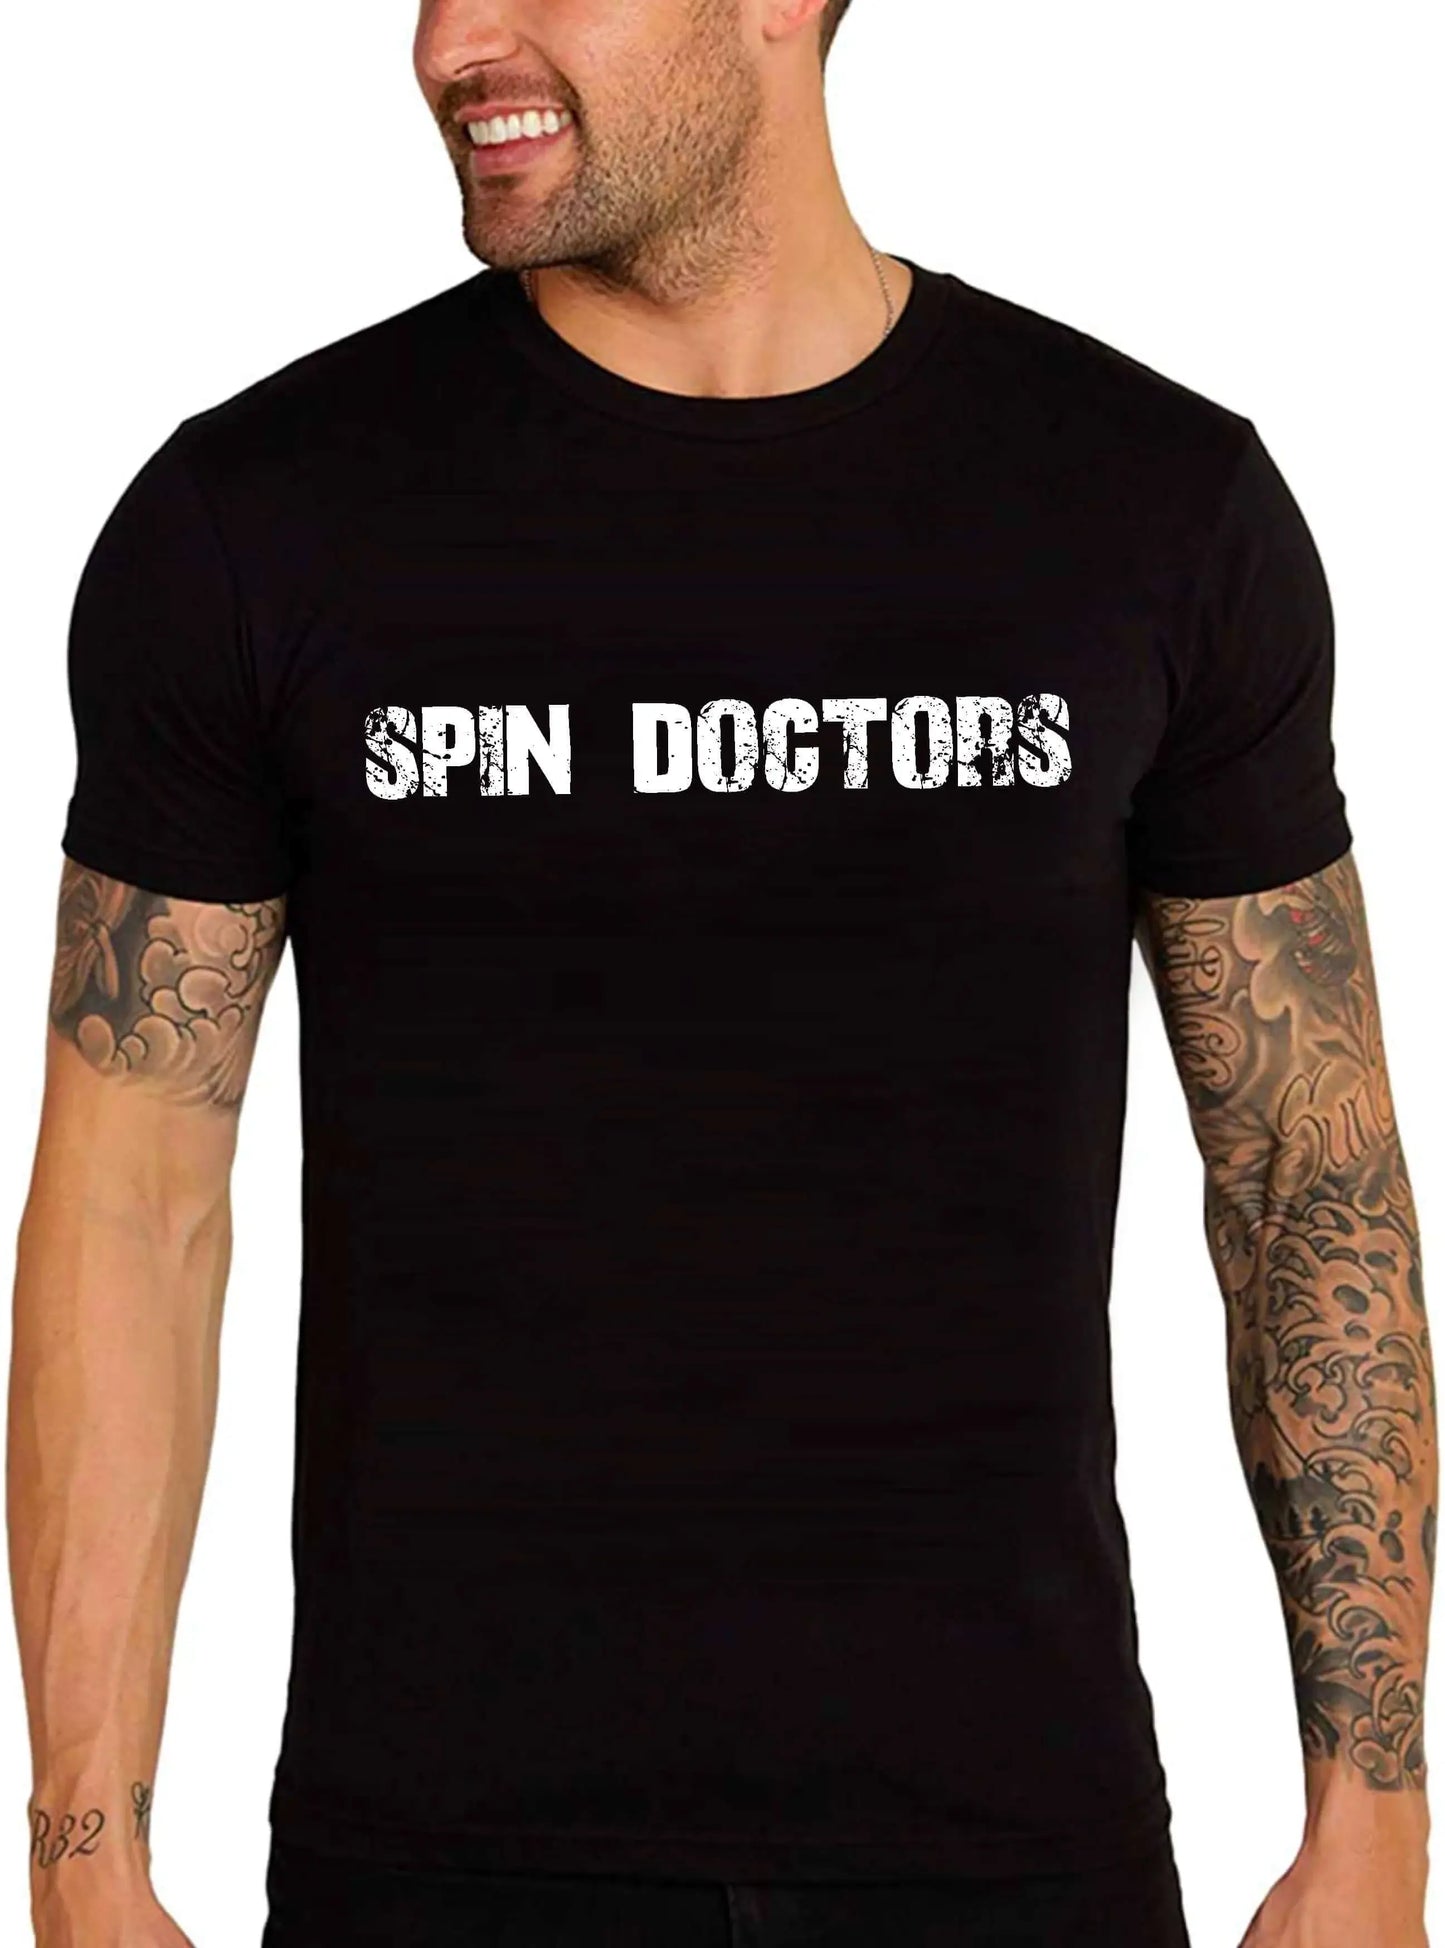 Men's Graphic T-Shirt Spin Doctors Eco-Friendly Limited Edition Short Sleeve Tee-Shirt Vintage Birthday Gift Novelty